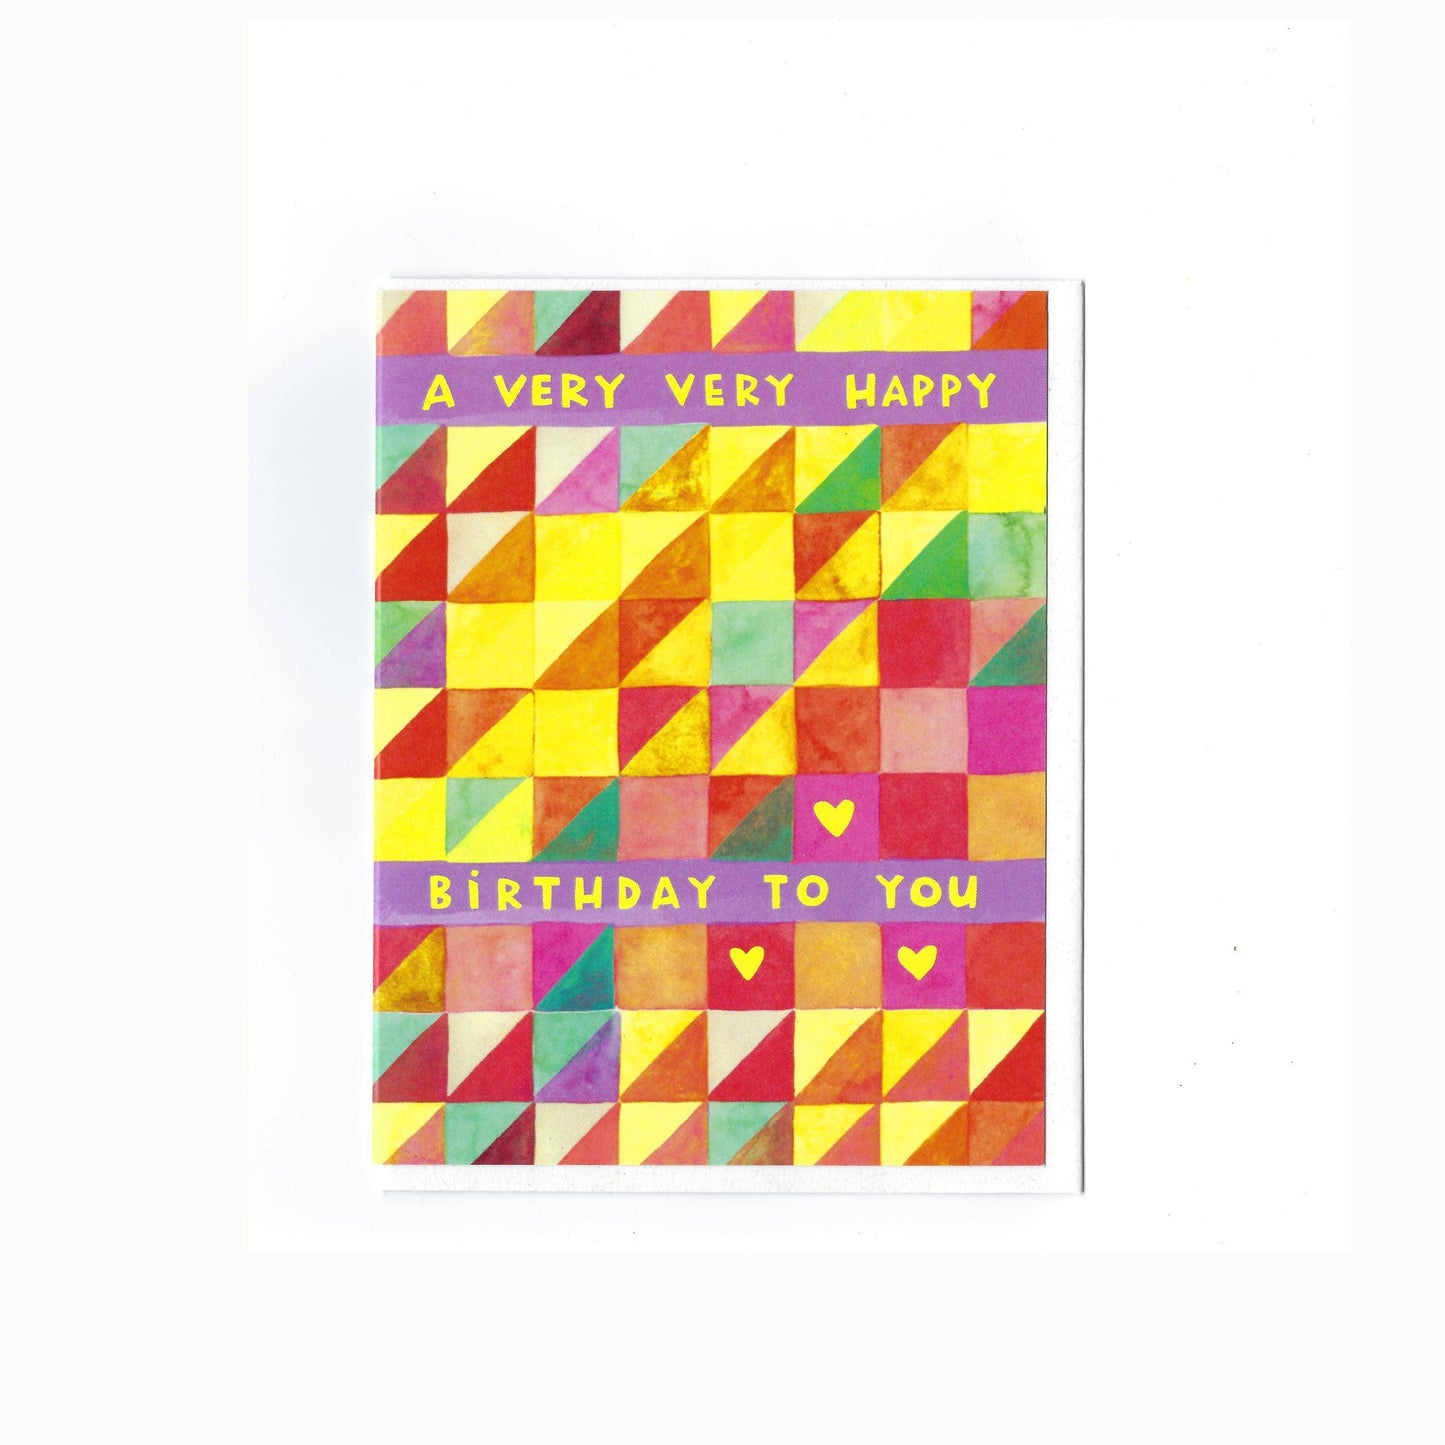 A Very Happy Birthday To You - bright colorful quilt card